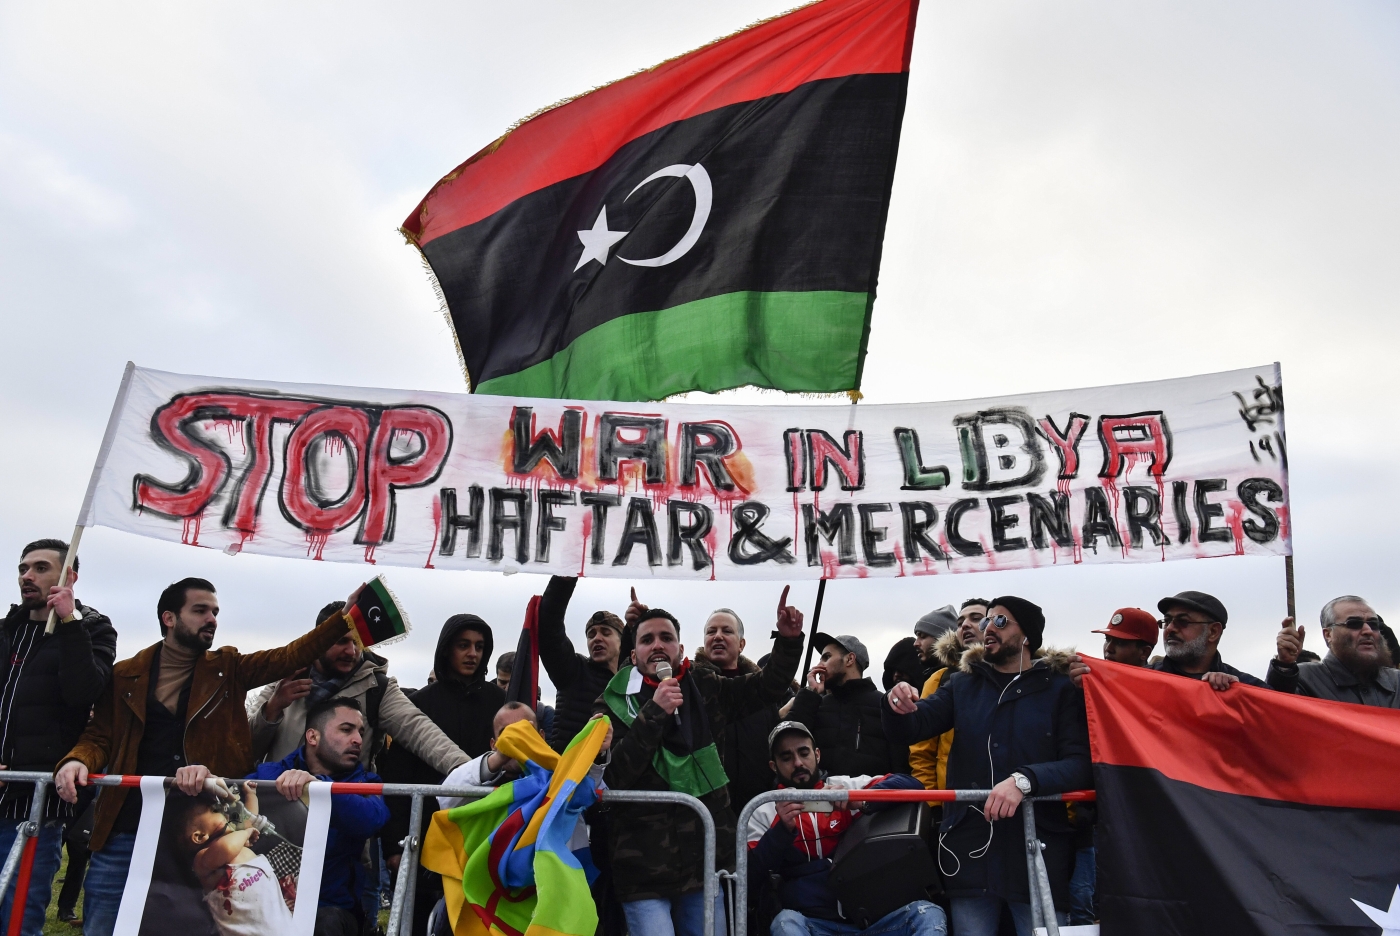 Protesters hold a banner reading 'Stop war in Libya, Haftar and mercenaries' during a protest near the chancellery during the Peace summit on Libya at the Chancellery in Berlin on 19 January, 2020.